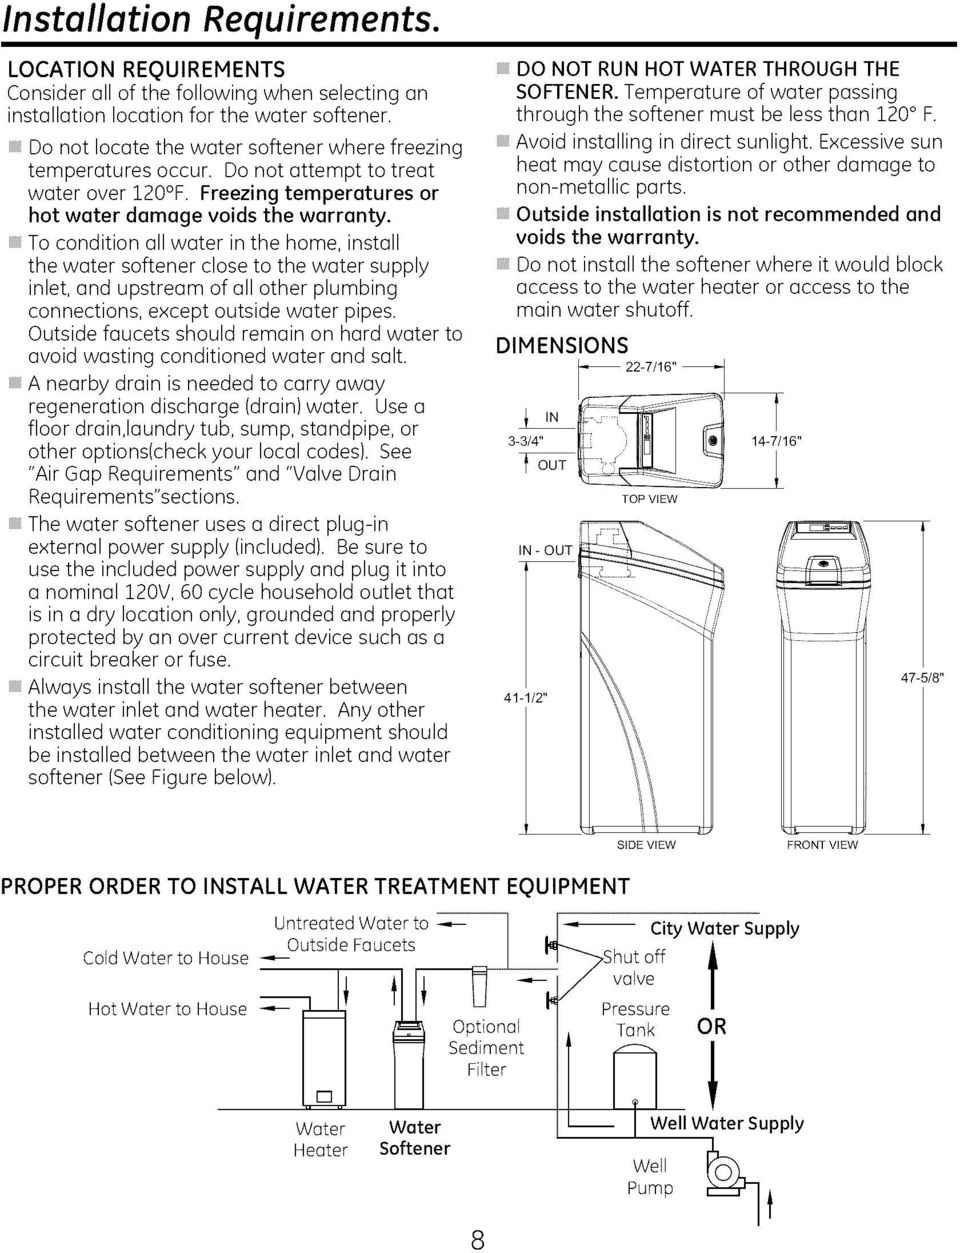 To condton all water n the home, nstall the water softener close to the water supply nlet, and upstream of all other plumbng connectons, except outsde water ppes.